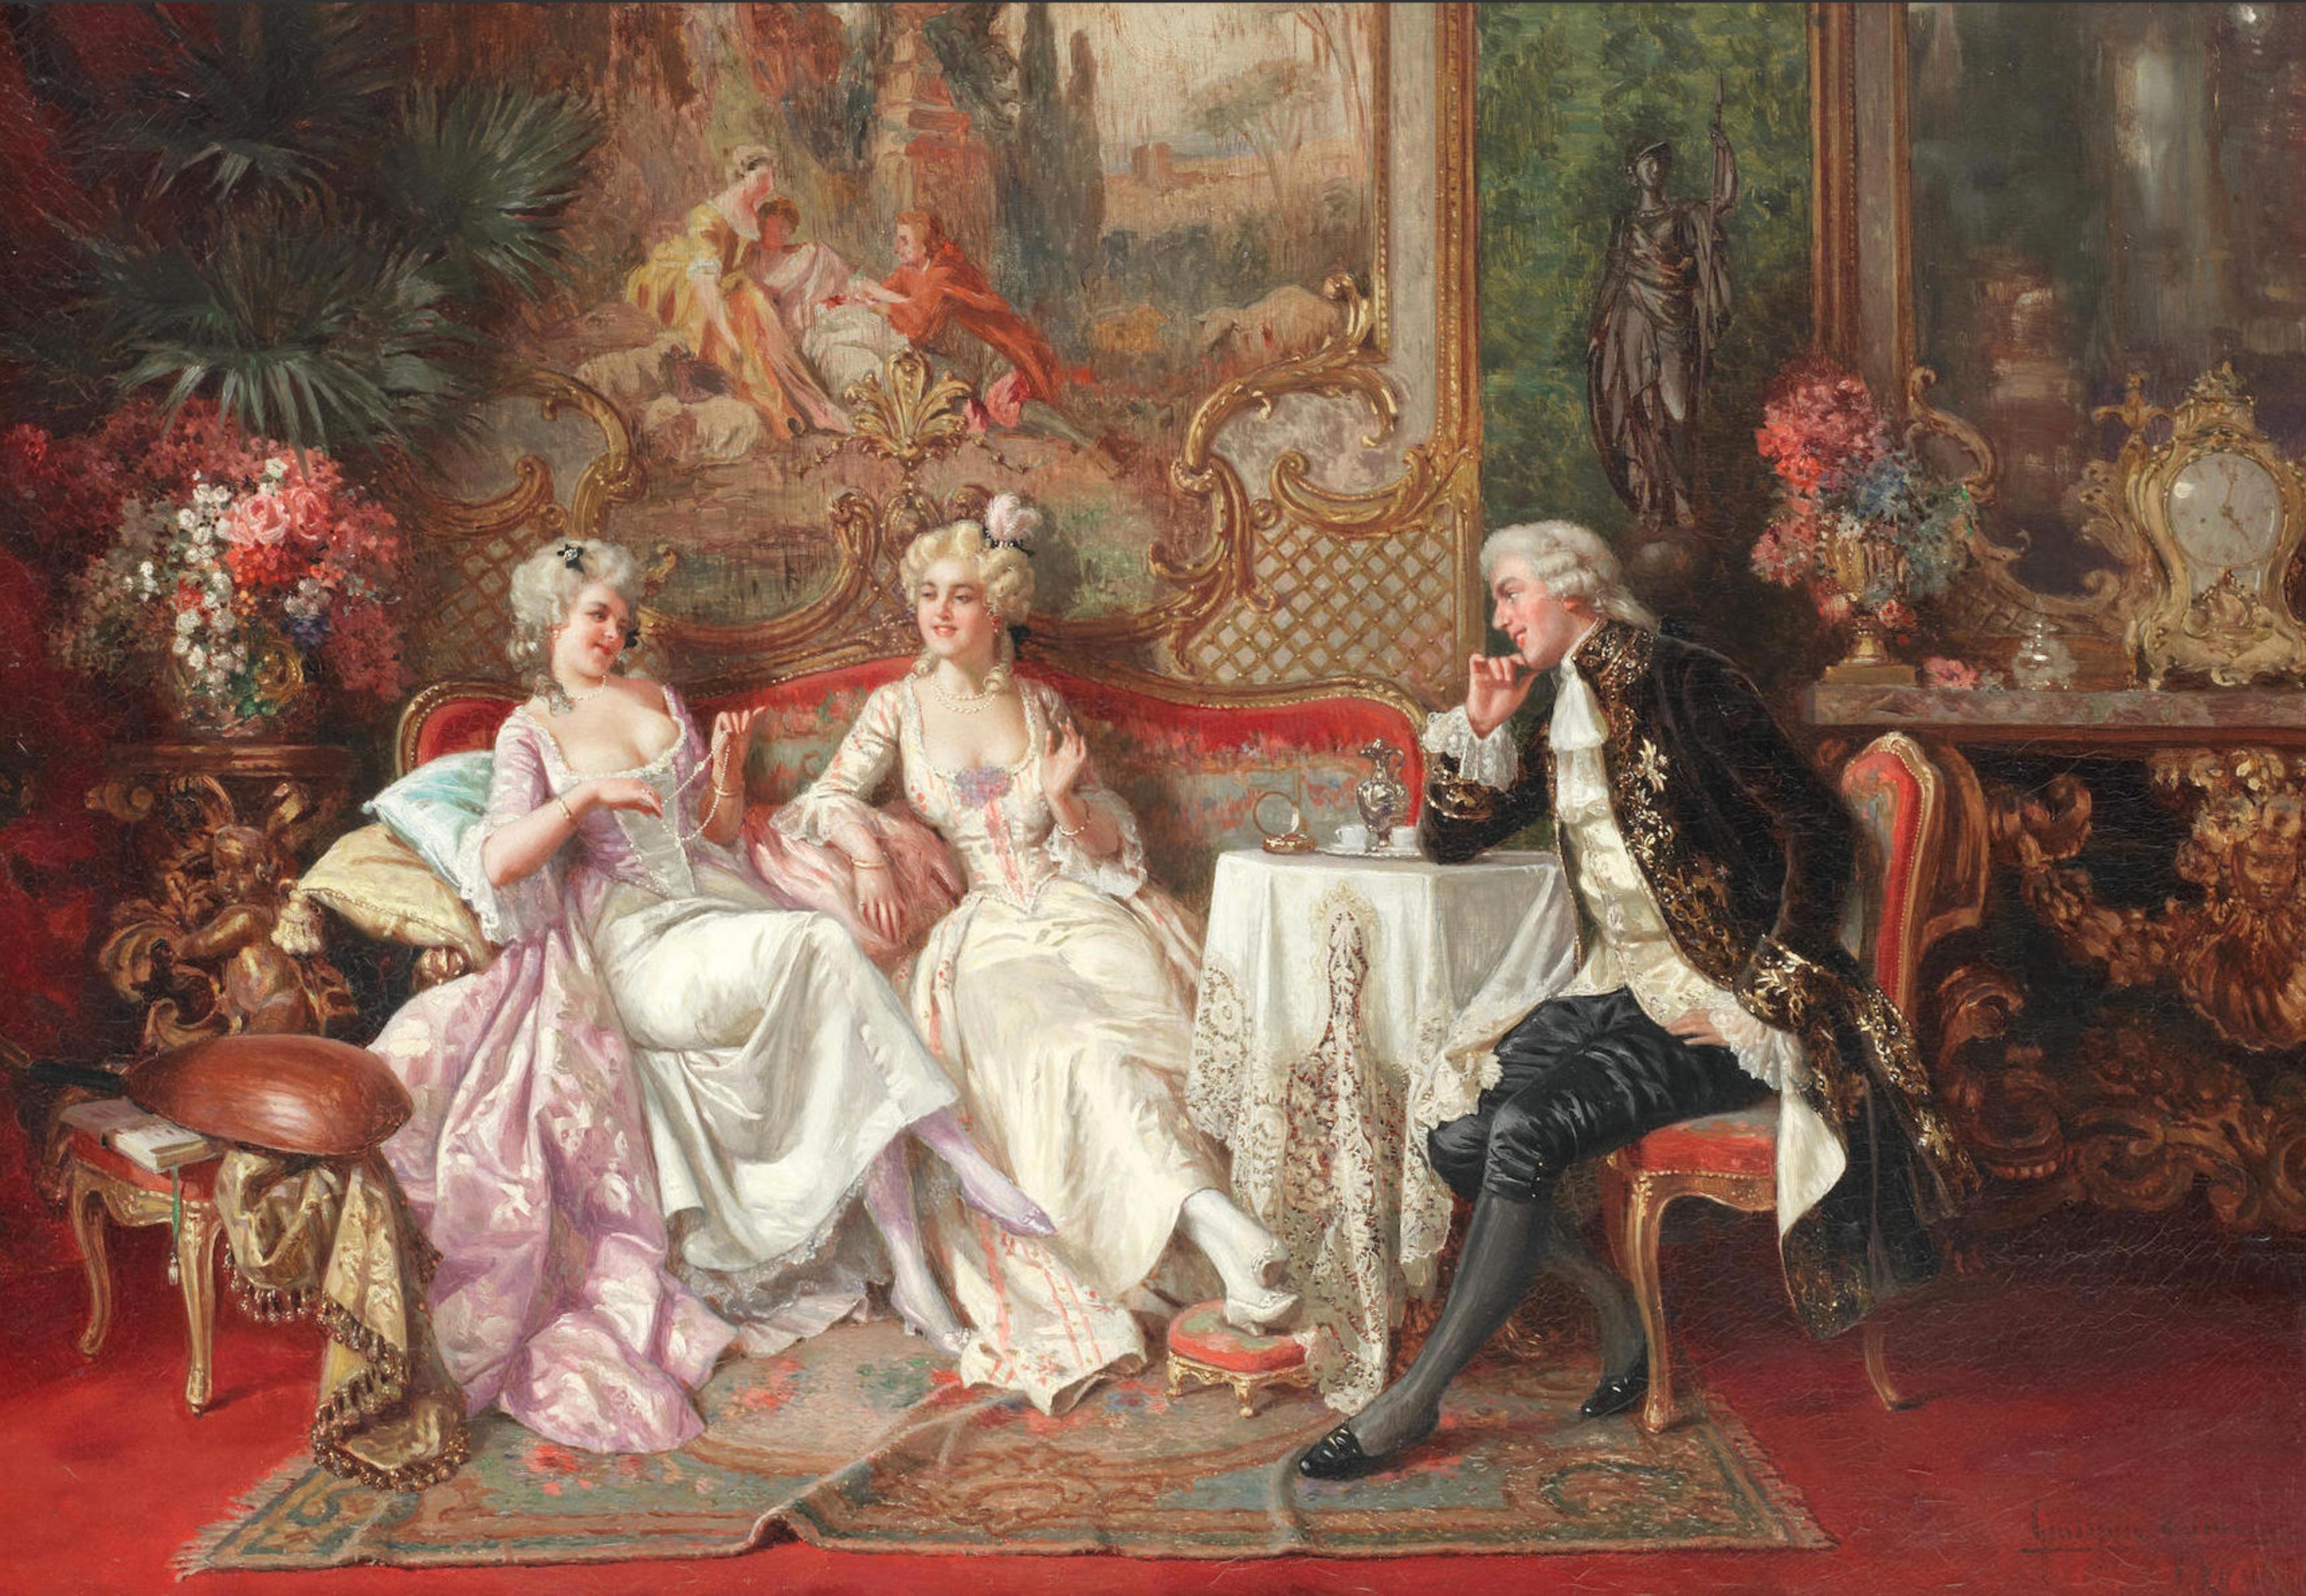 An Afternoon of Leisure
By Giuseppe Guidi, (1884-1931)

A noted Italian painter of genre scenes and interior merry companies, this oil on canvas depicts two ladies of the court, accompanied by a charming gentleman. Dressed in lavish 18th century